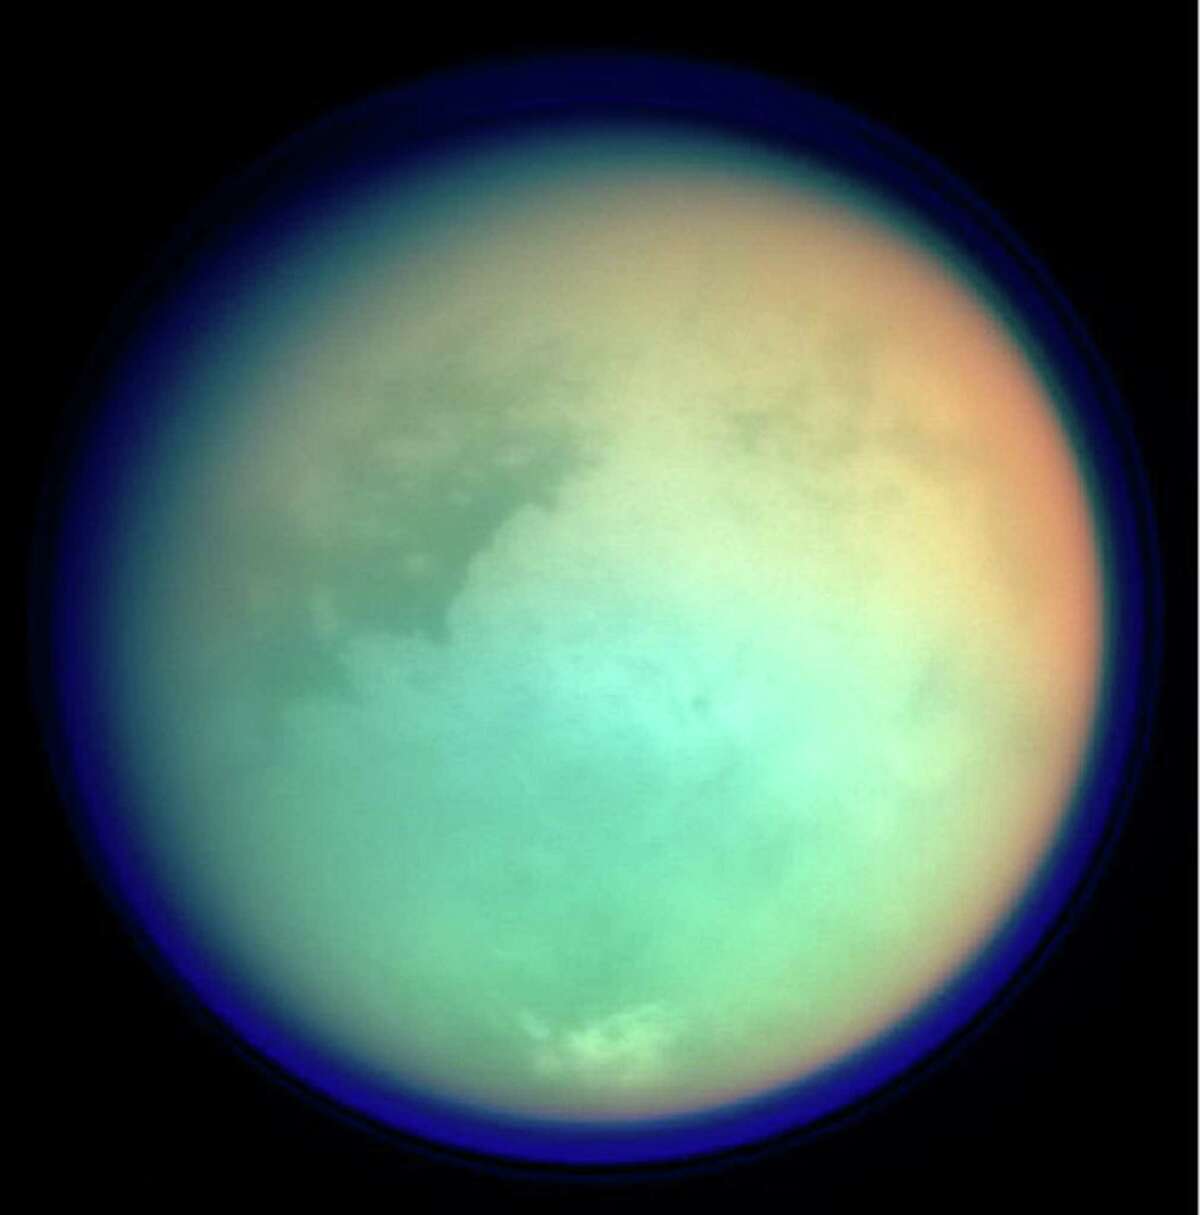 This photo shows Saturn’s moon, Titan, in ultraviolet and infrared wavelengths. Scientists have been fascinated with Titan for many years because, similar to Earth, Saturn’s largest moon has a nitrogen-dominated atmosphere.